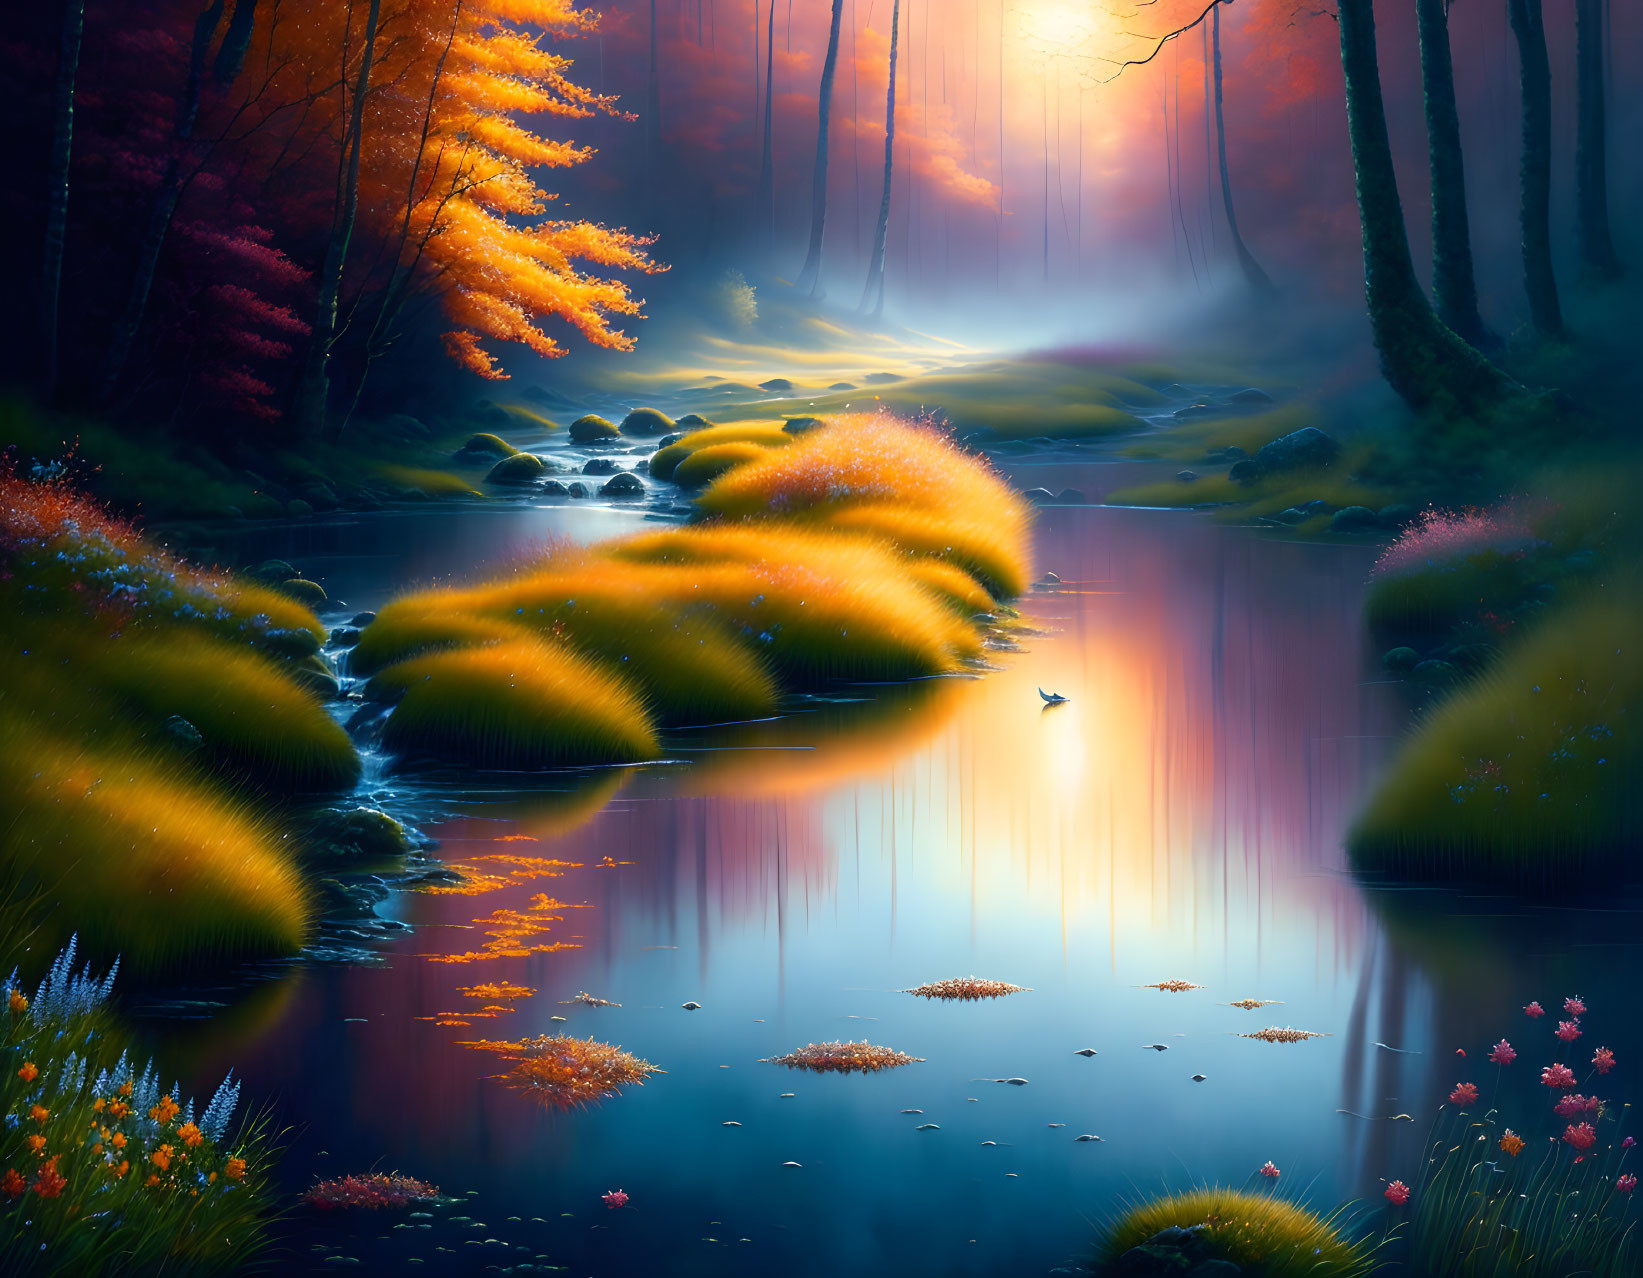 Tranquil forest scene with serene river, mossy rocks, autumn trees, hazy sunlight,